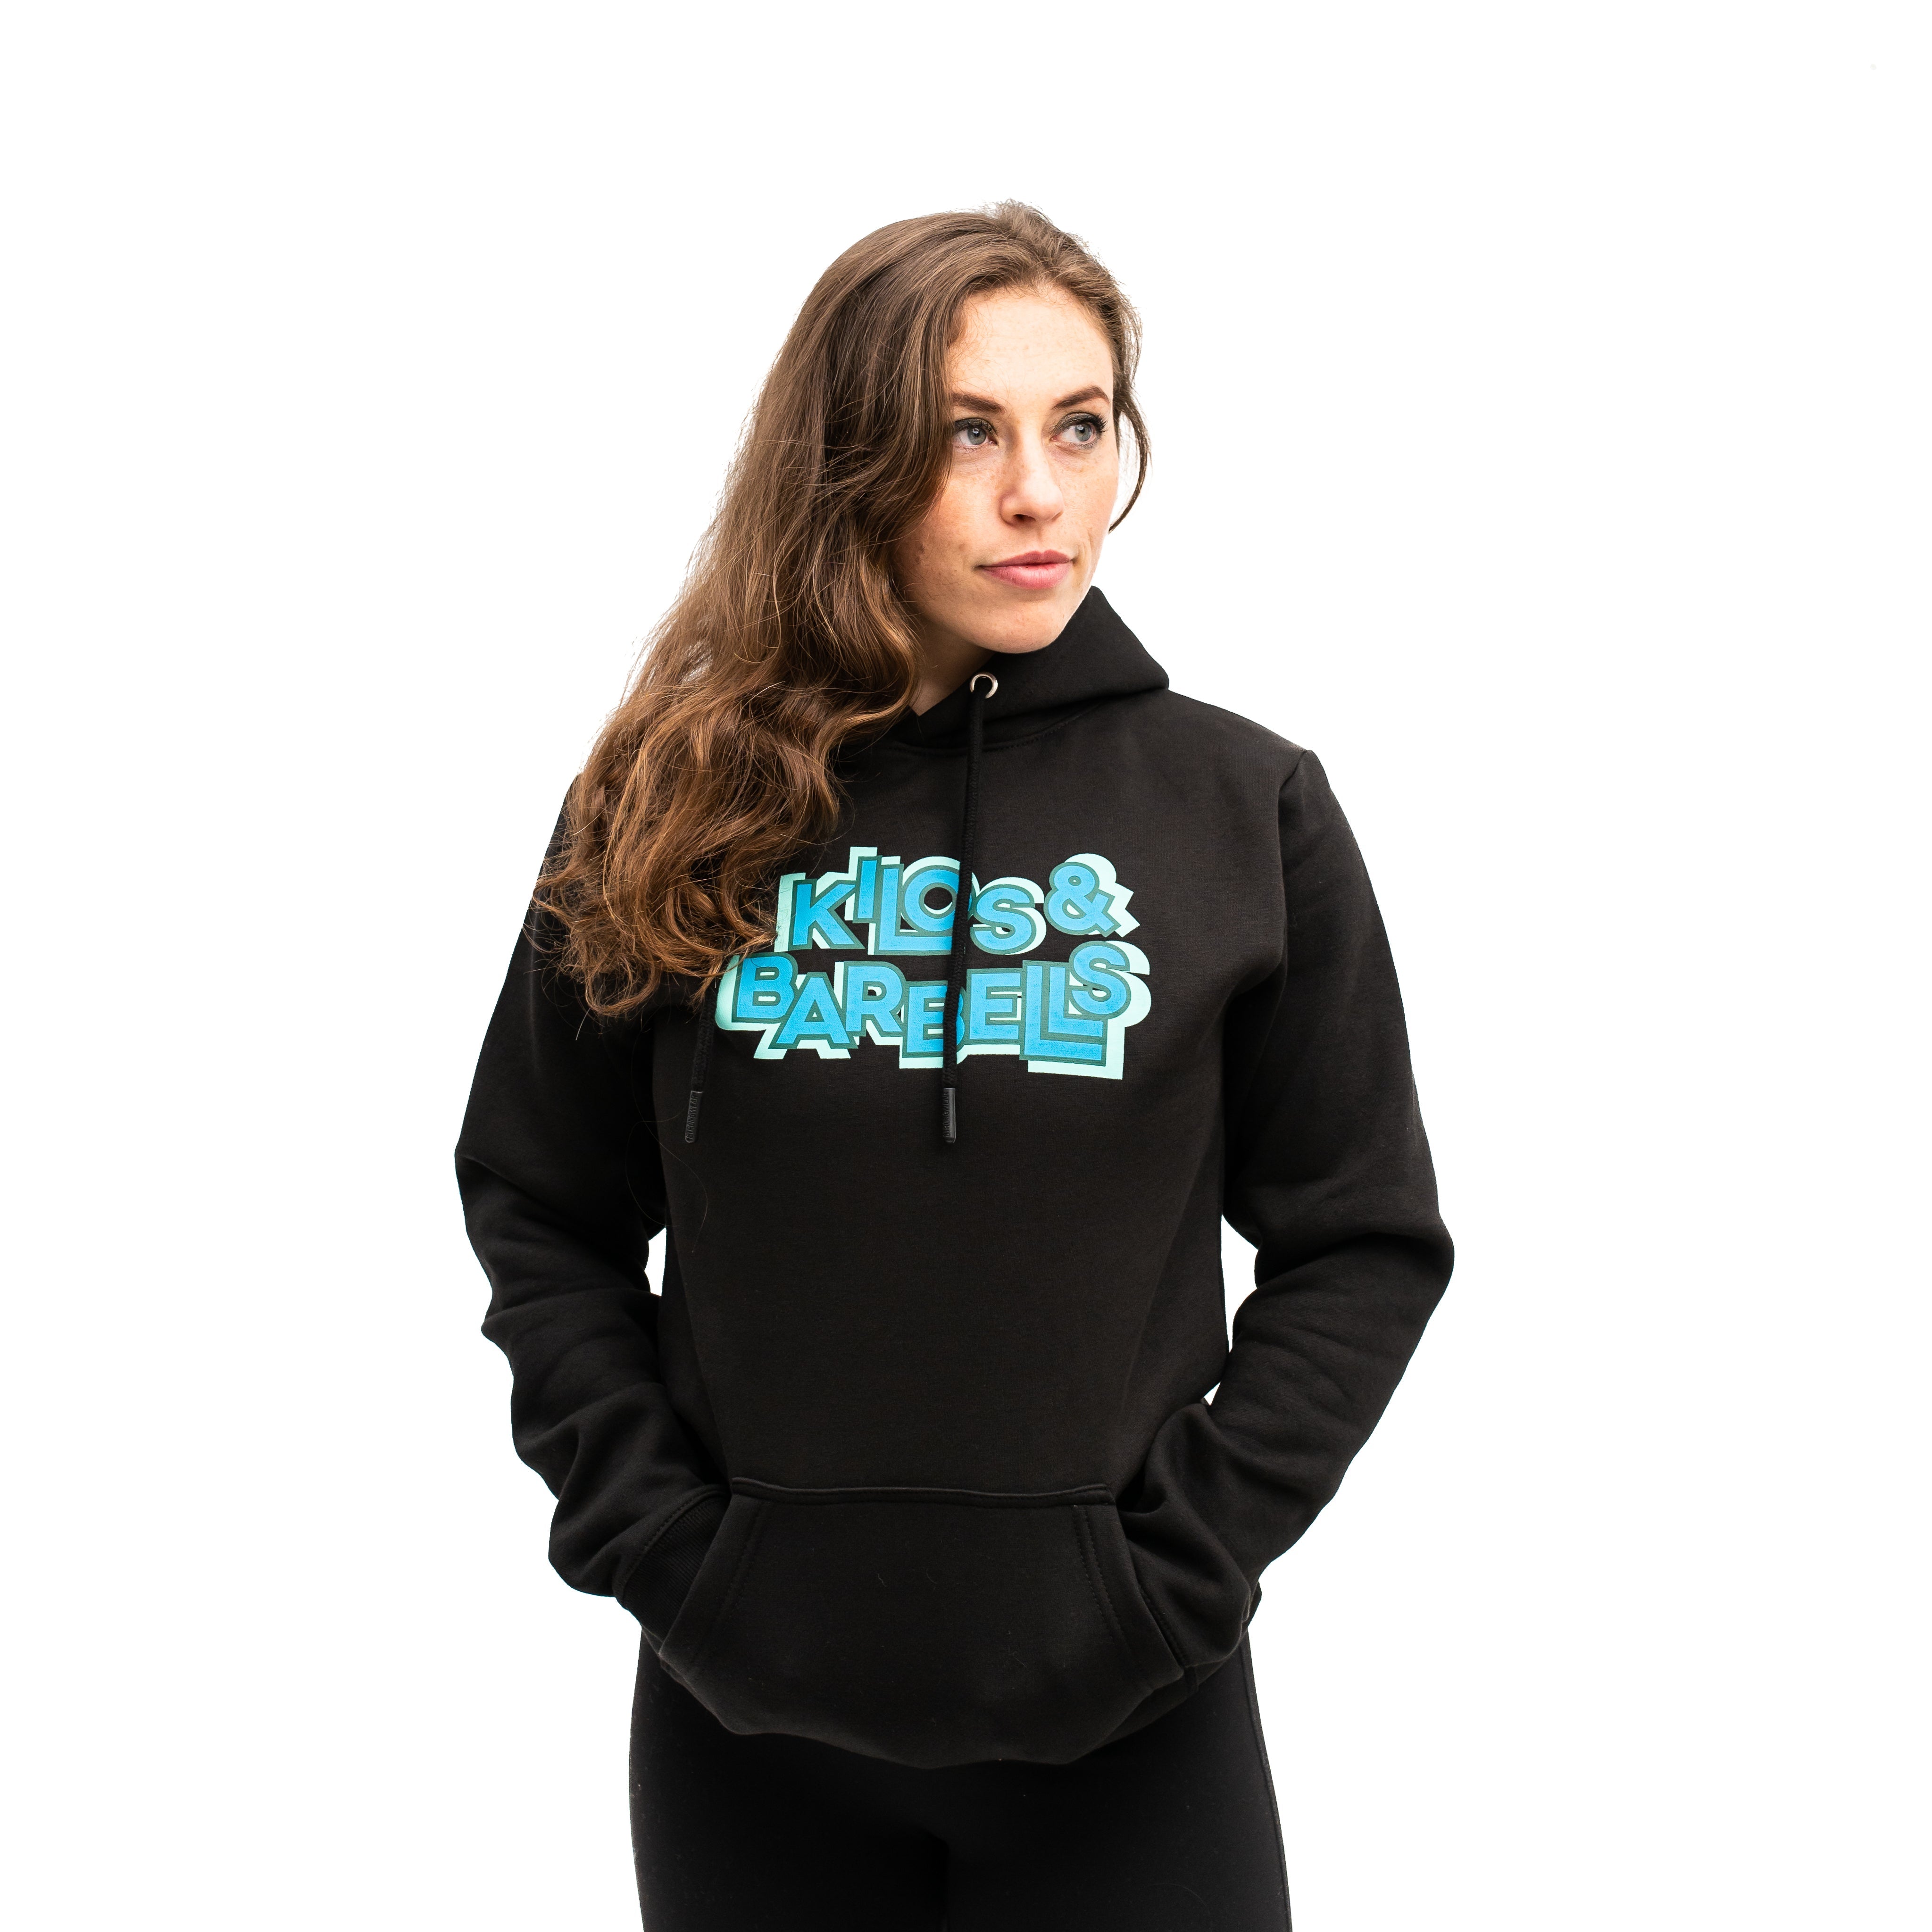 Kilos and Barbells Aqua Bar Grip Hoodie is great in and out the gym. Purchase Kilos and Barbells Aqua Bar Grip Hoodie from A7 UK and A7 Europe. The silicone grip helps with slippery commercial benches and bars and anchors the barbell to your back. Kilos and Barbells Aqua Bar Grip Hoodie is a great gift for powerlifters. A7UK has the best Powerlifting apparel for all your workouts. Available in UK and Europe including France, Italy, Germany, the Netherlands, Sweden and Poland.